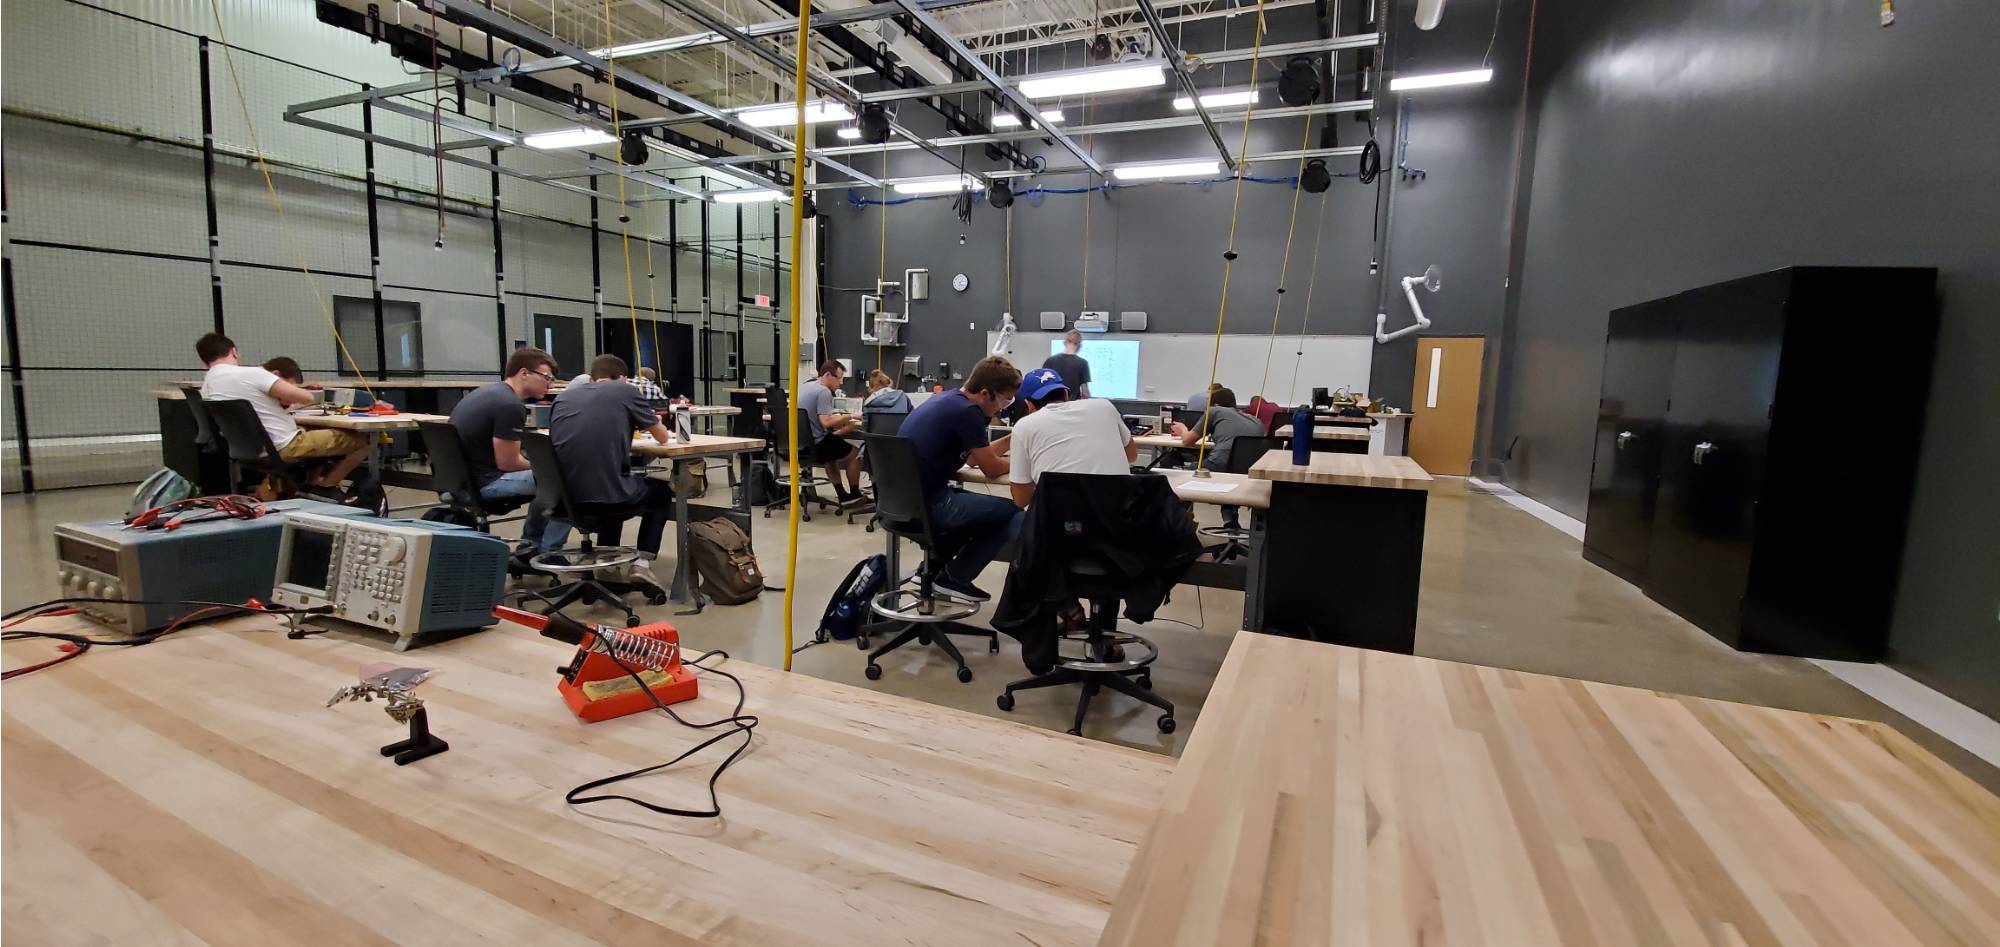 flexible design space set up as a student soldering certification lab